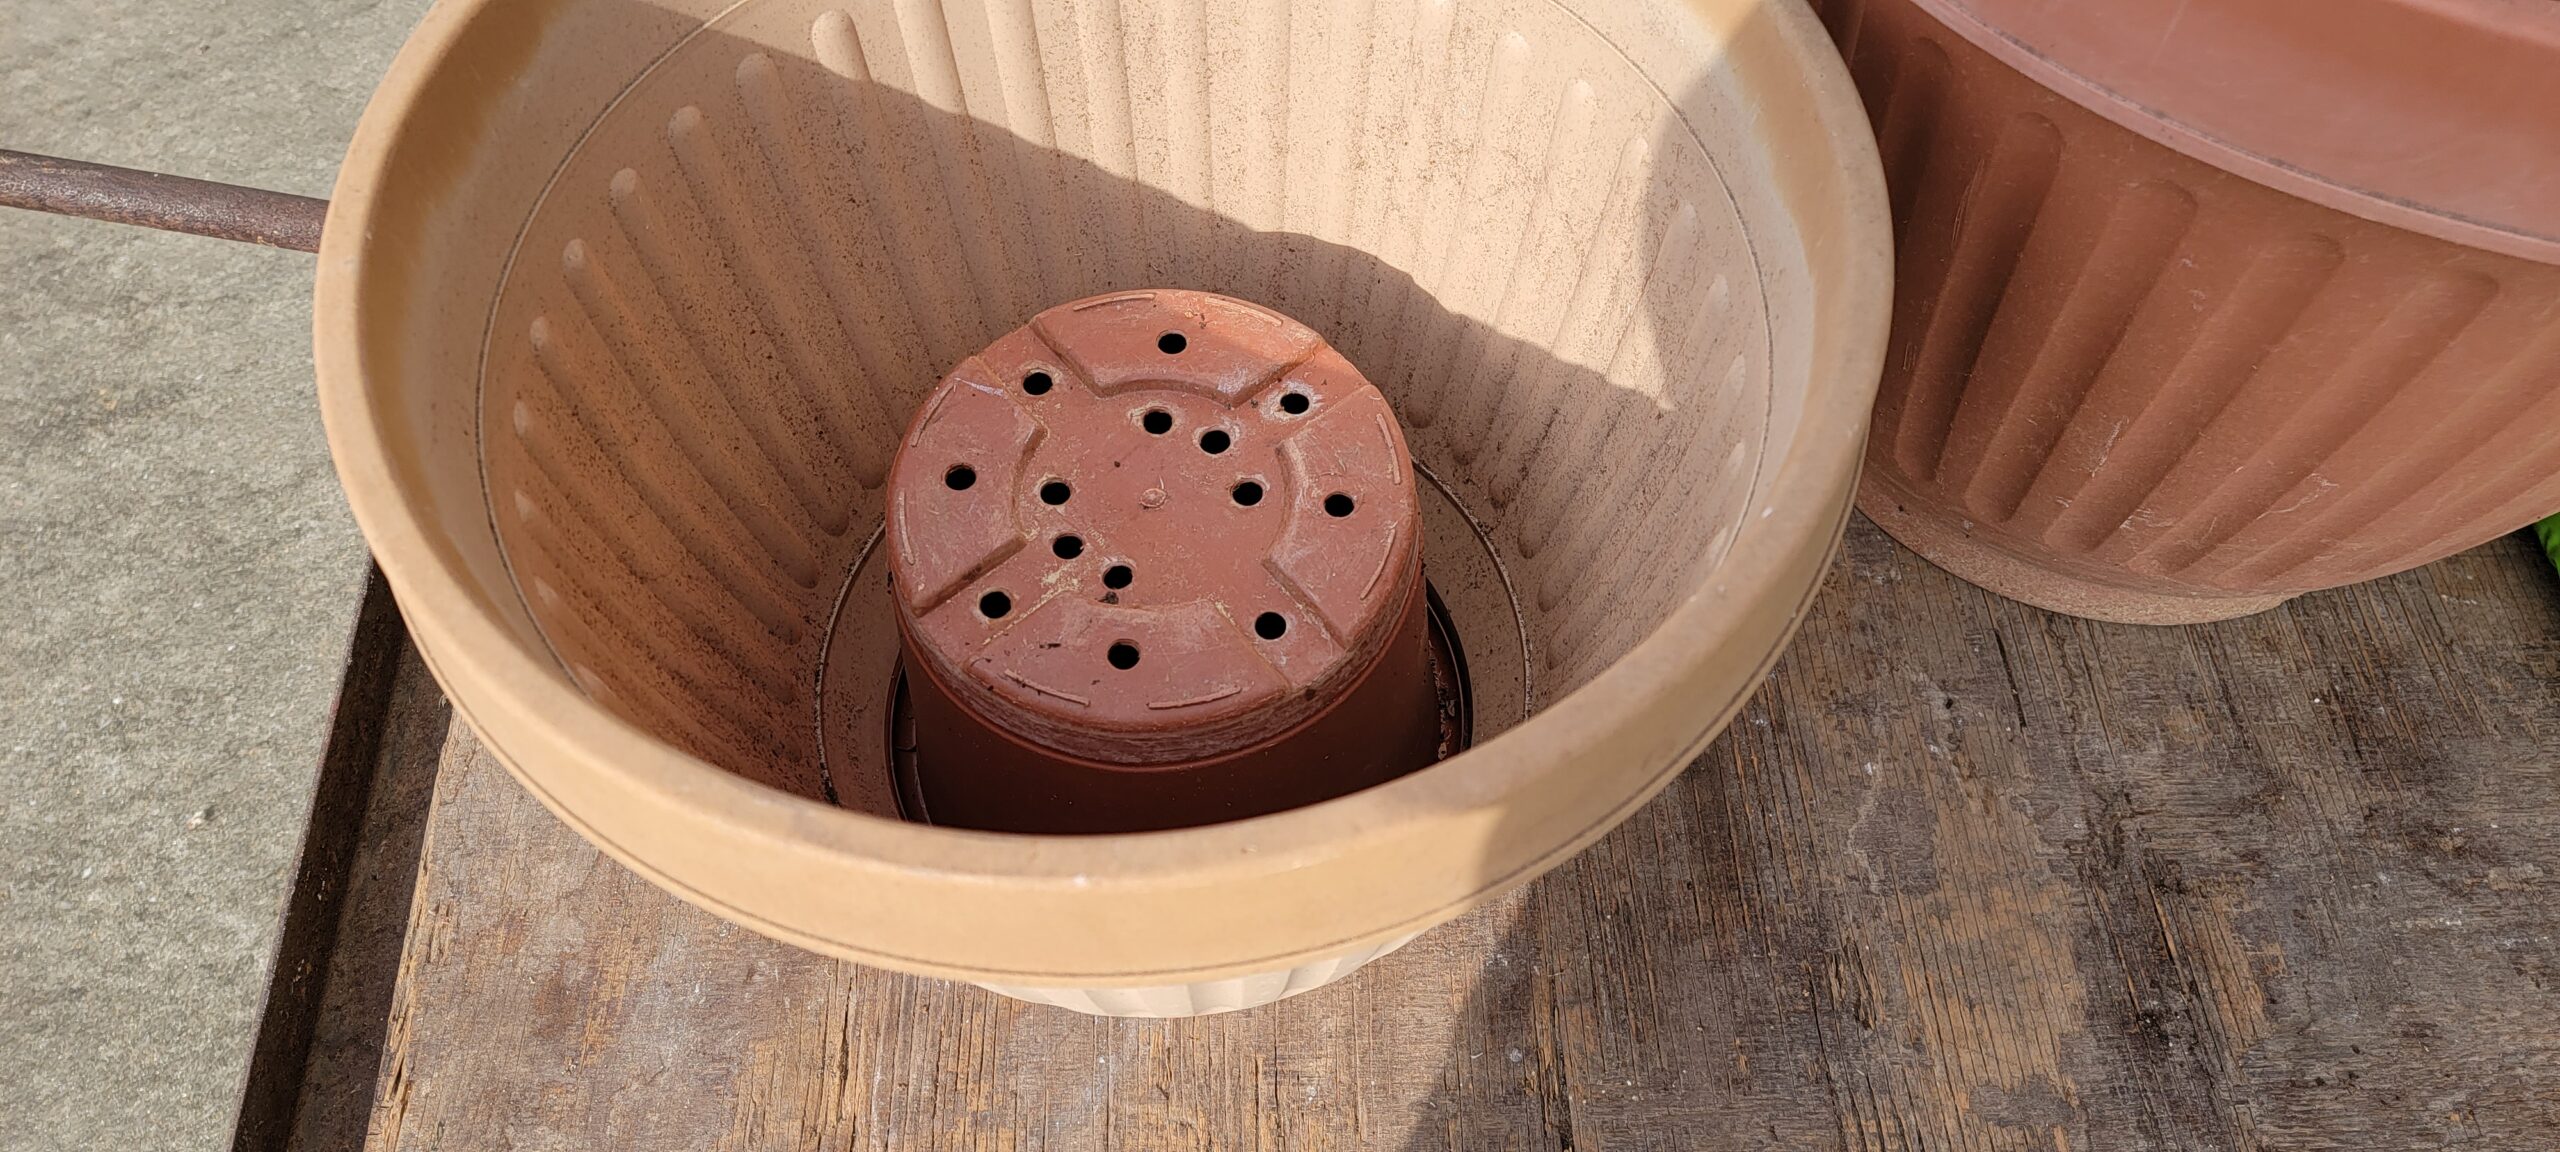 Re-potting Using A Smaller Pot Inside the larger pot to save on soil